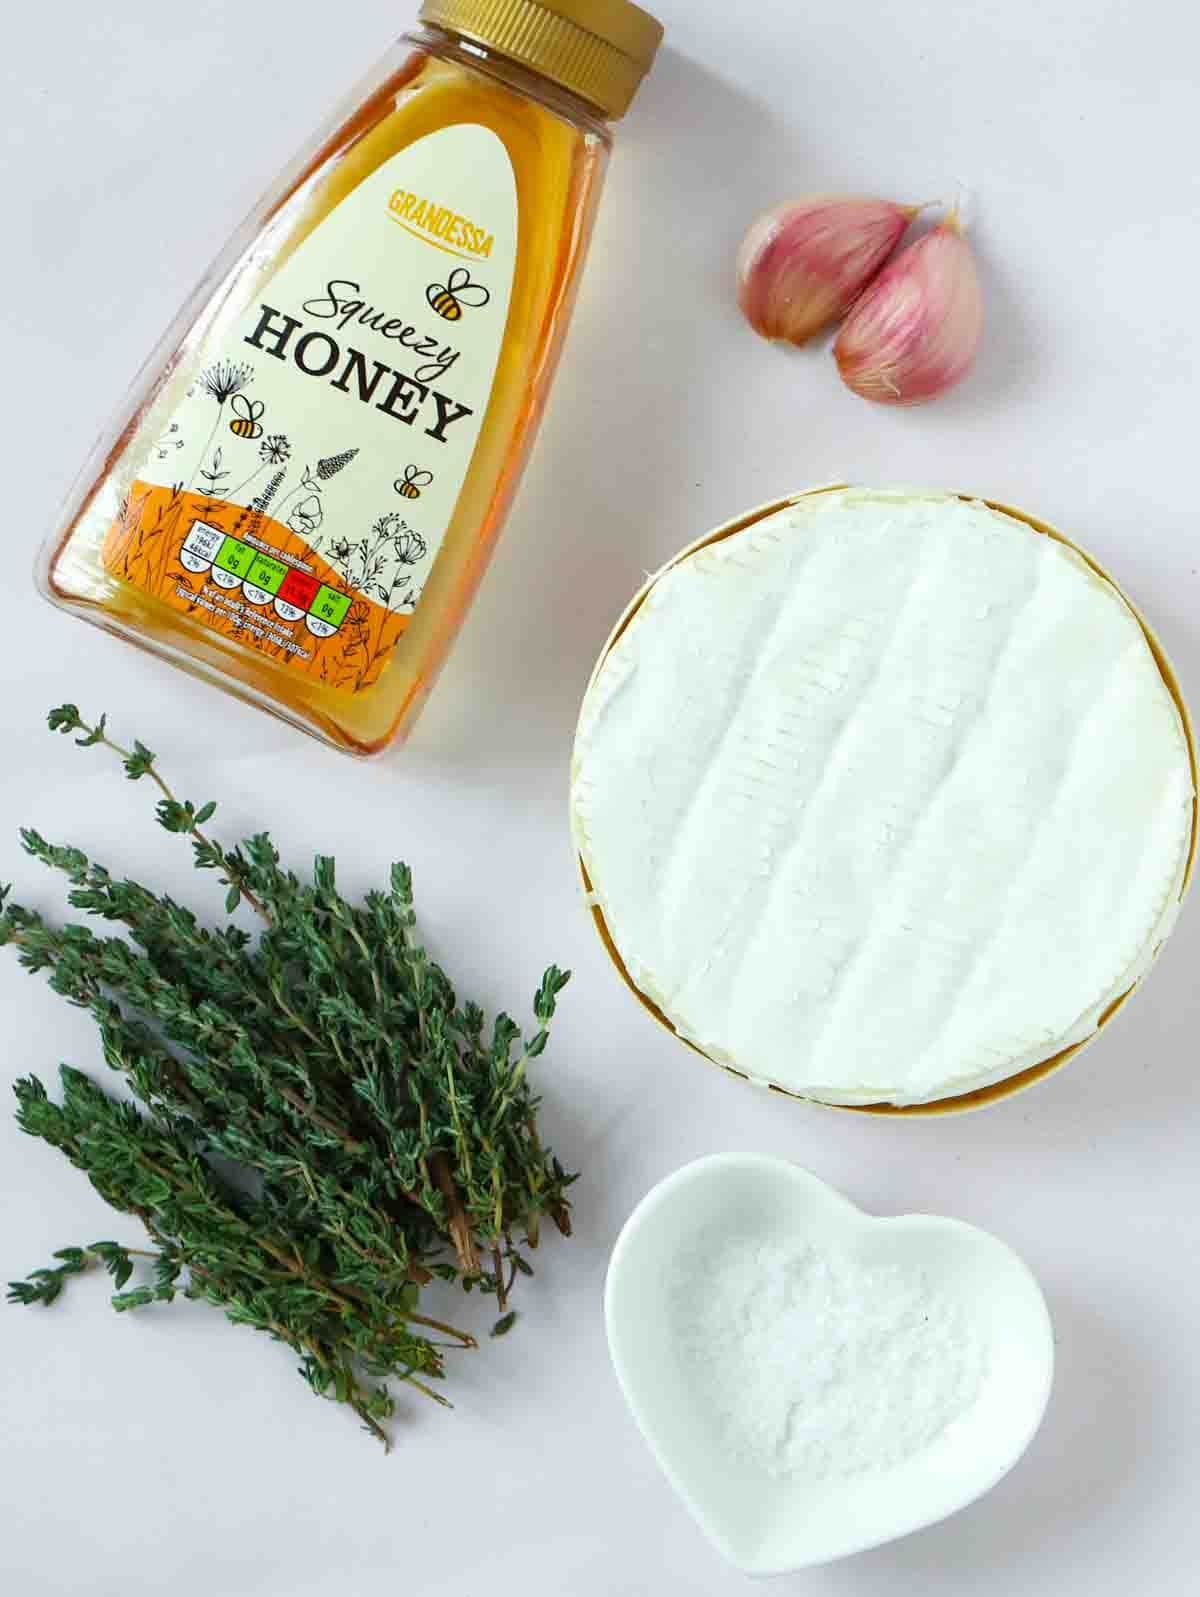 Ingredients for baked camembert laid on a counter. A bottle of honey, uncooked camembert. salt, garlic and thyme.